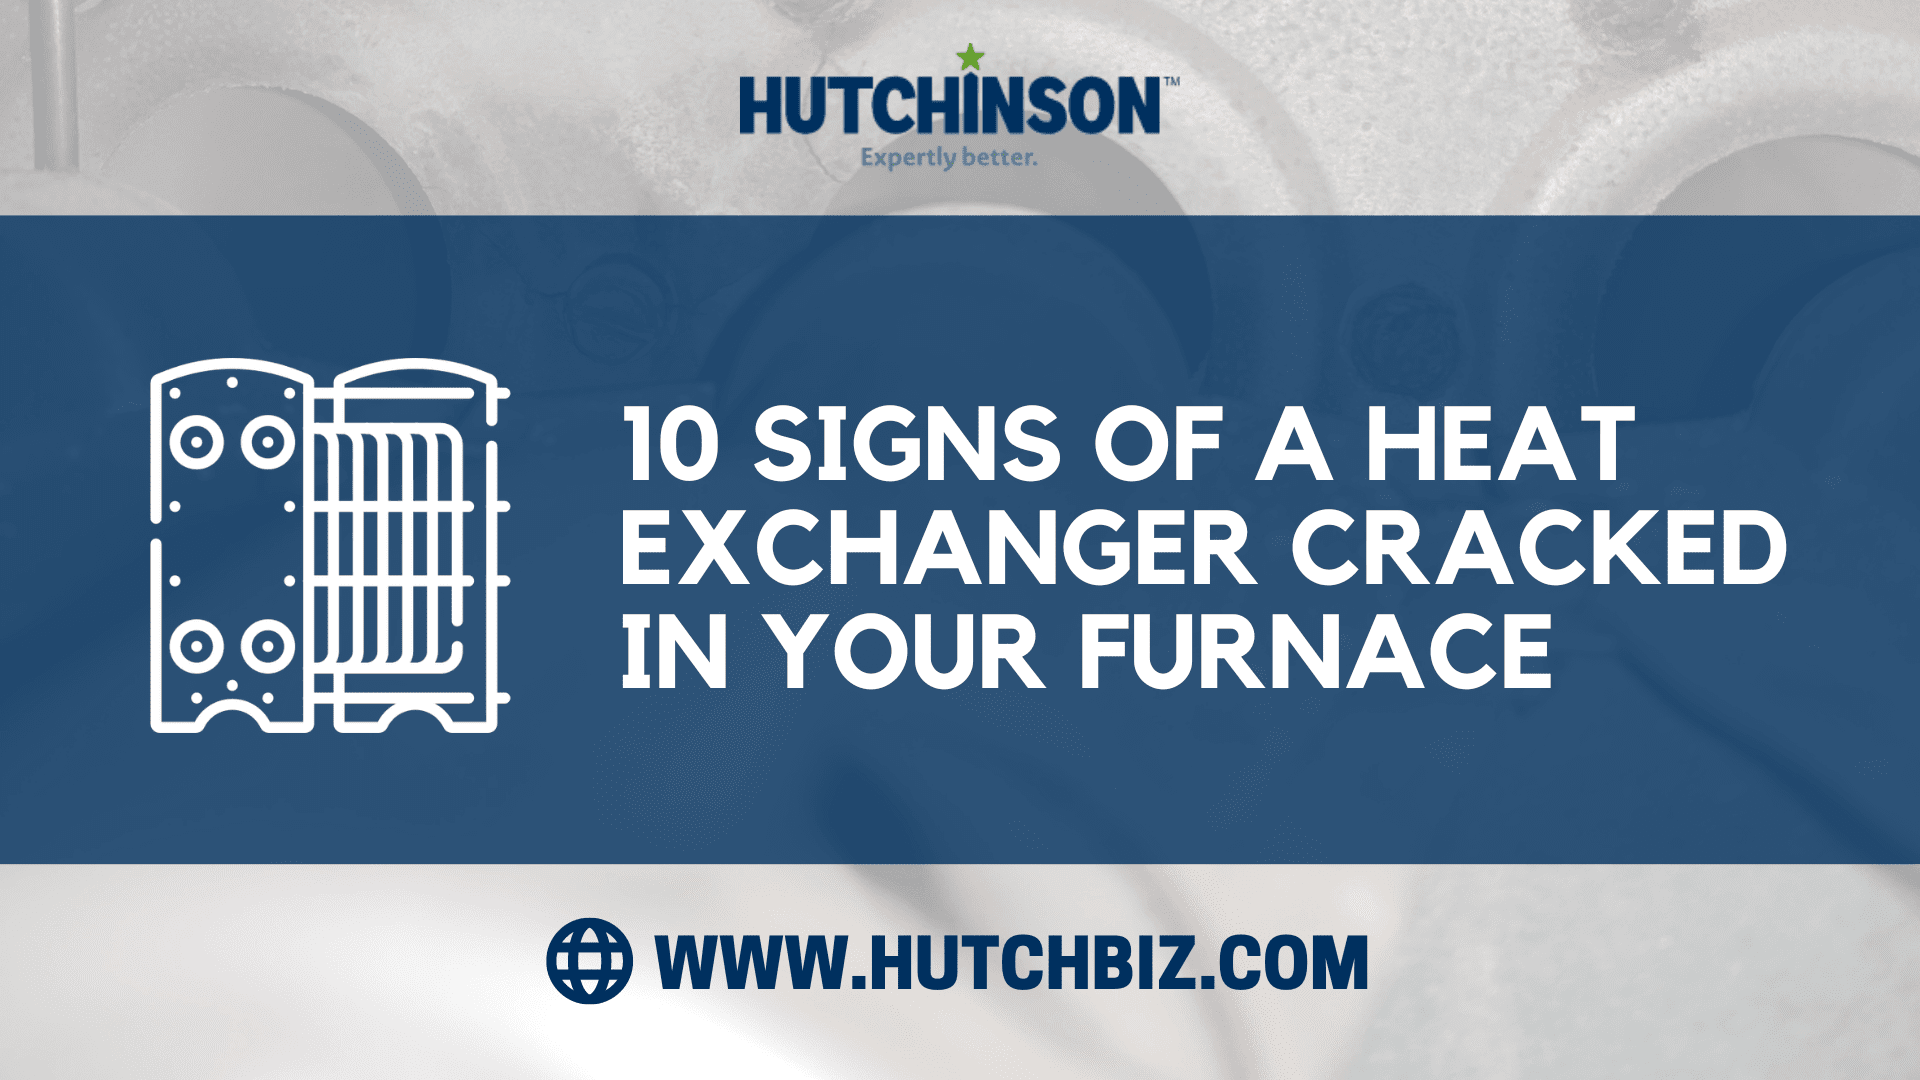 10 Signs of a Heat Exchanger Cracked in Your Furnace